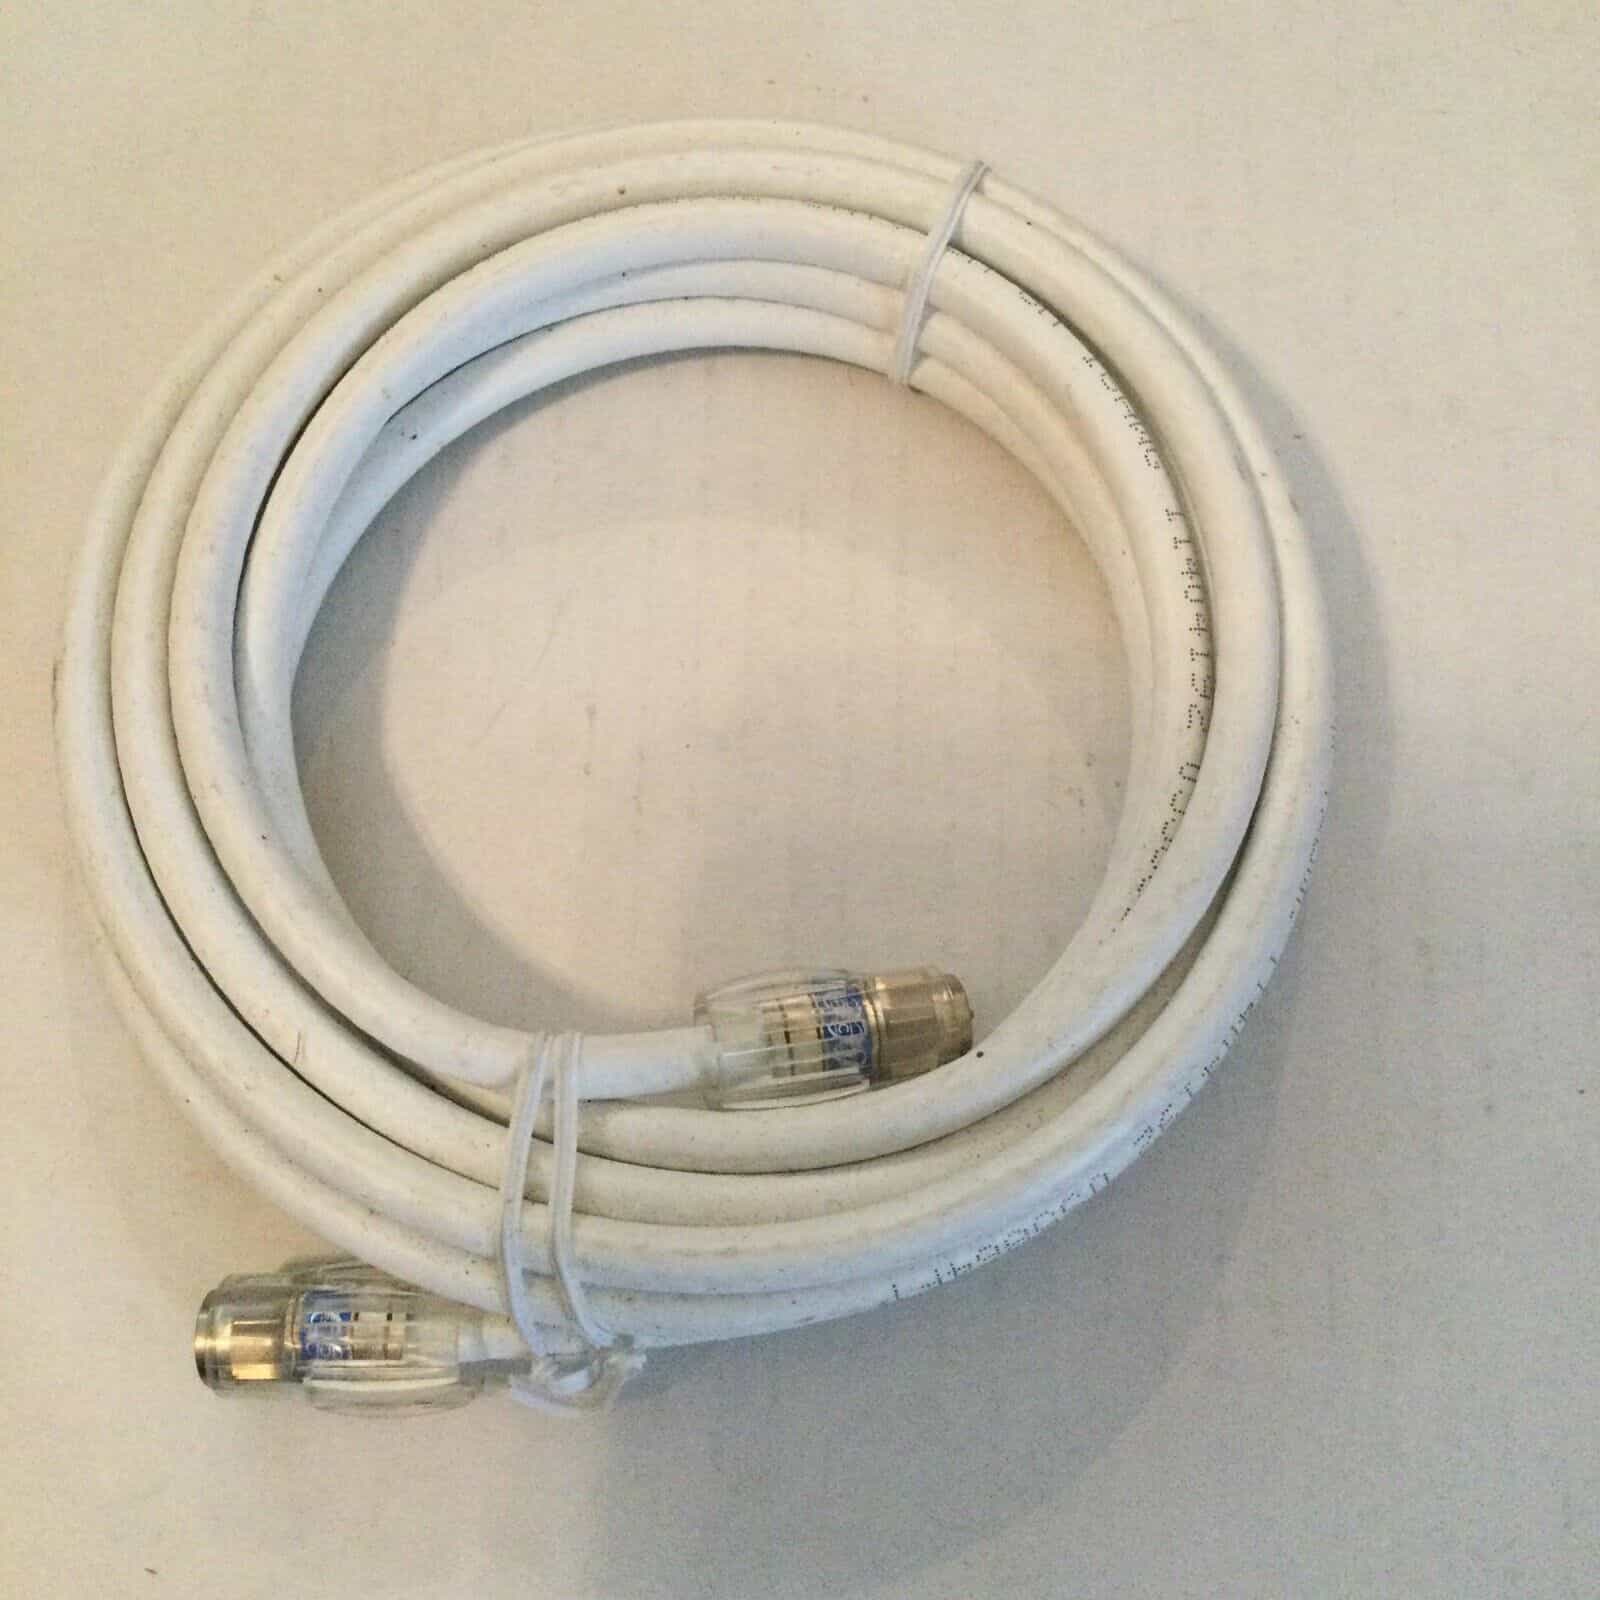 TV Coax cable 6 ft, RG6 with screw on ends for HDTV/satellite/etc NEW